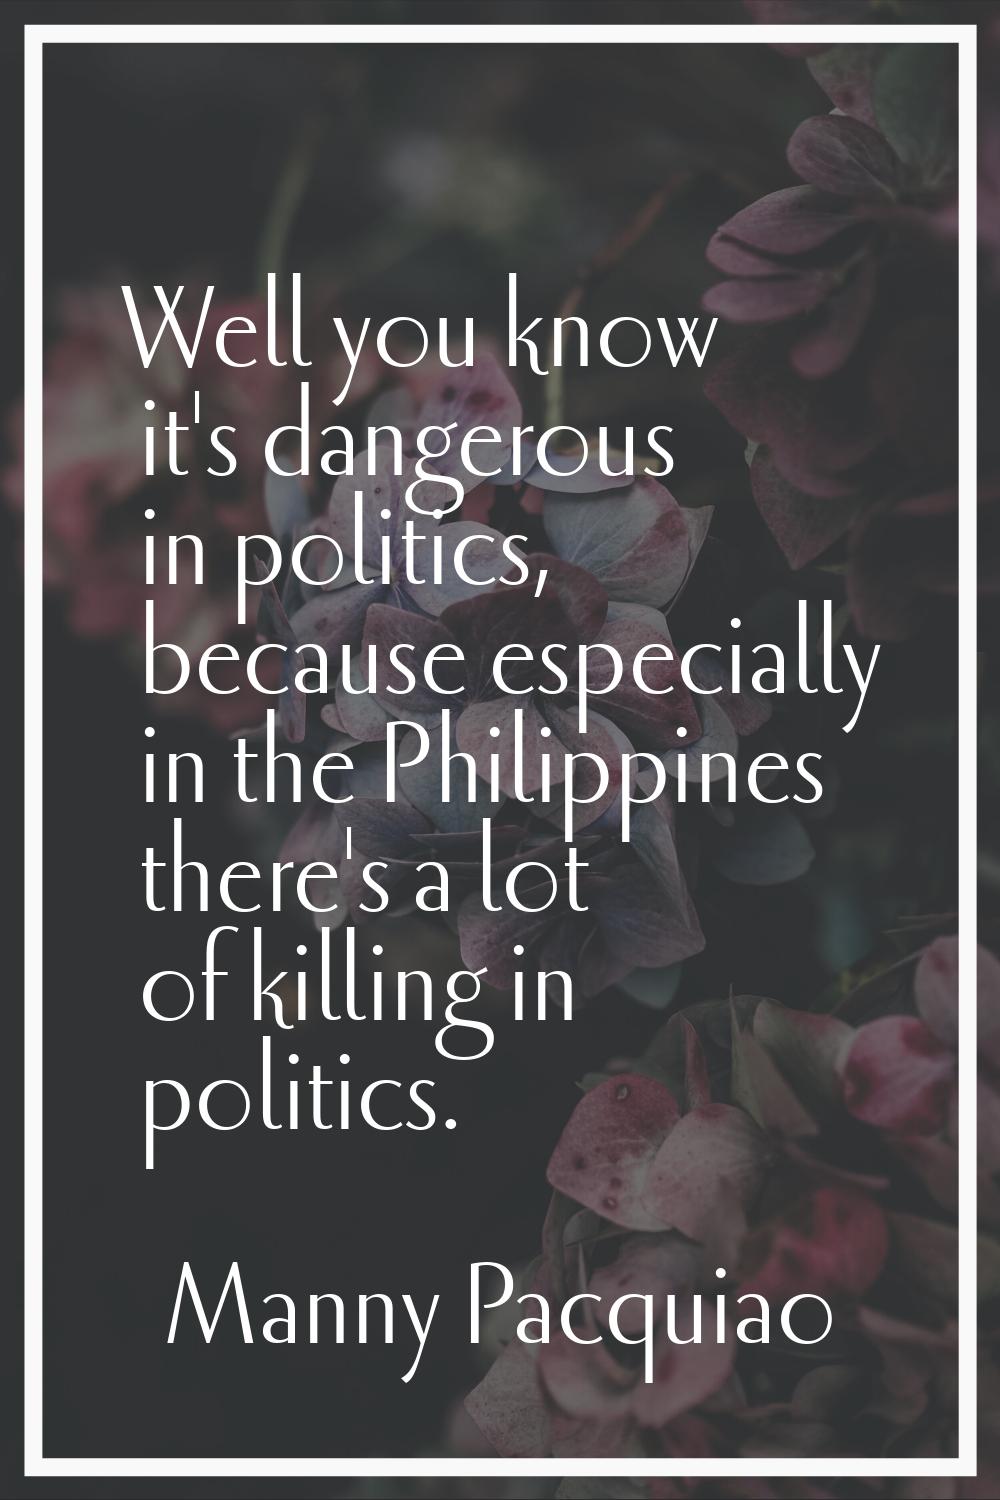 Well you know it's dangerous in politics, because especially in the Philippines there's a lot of ki